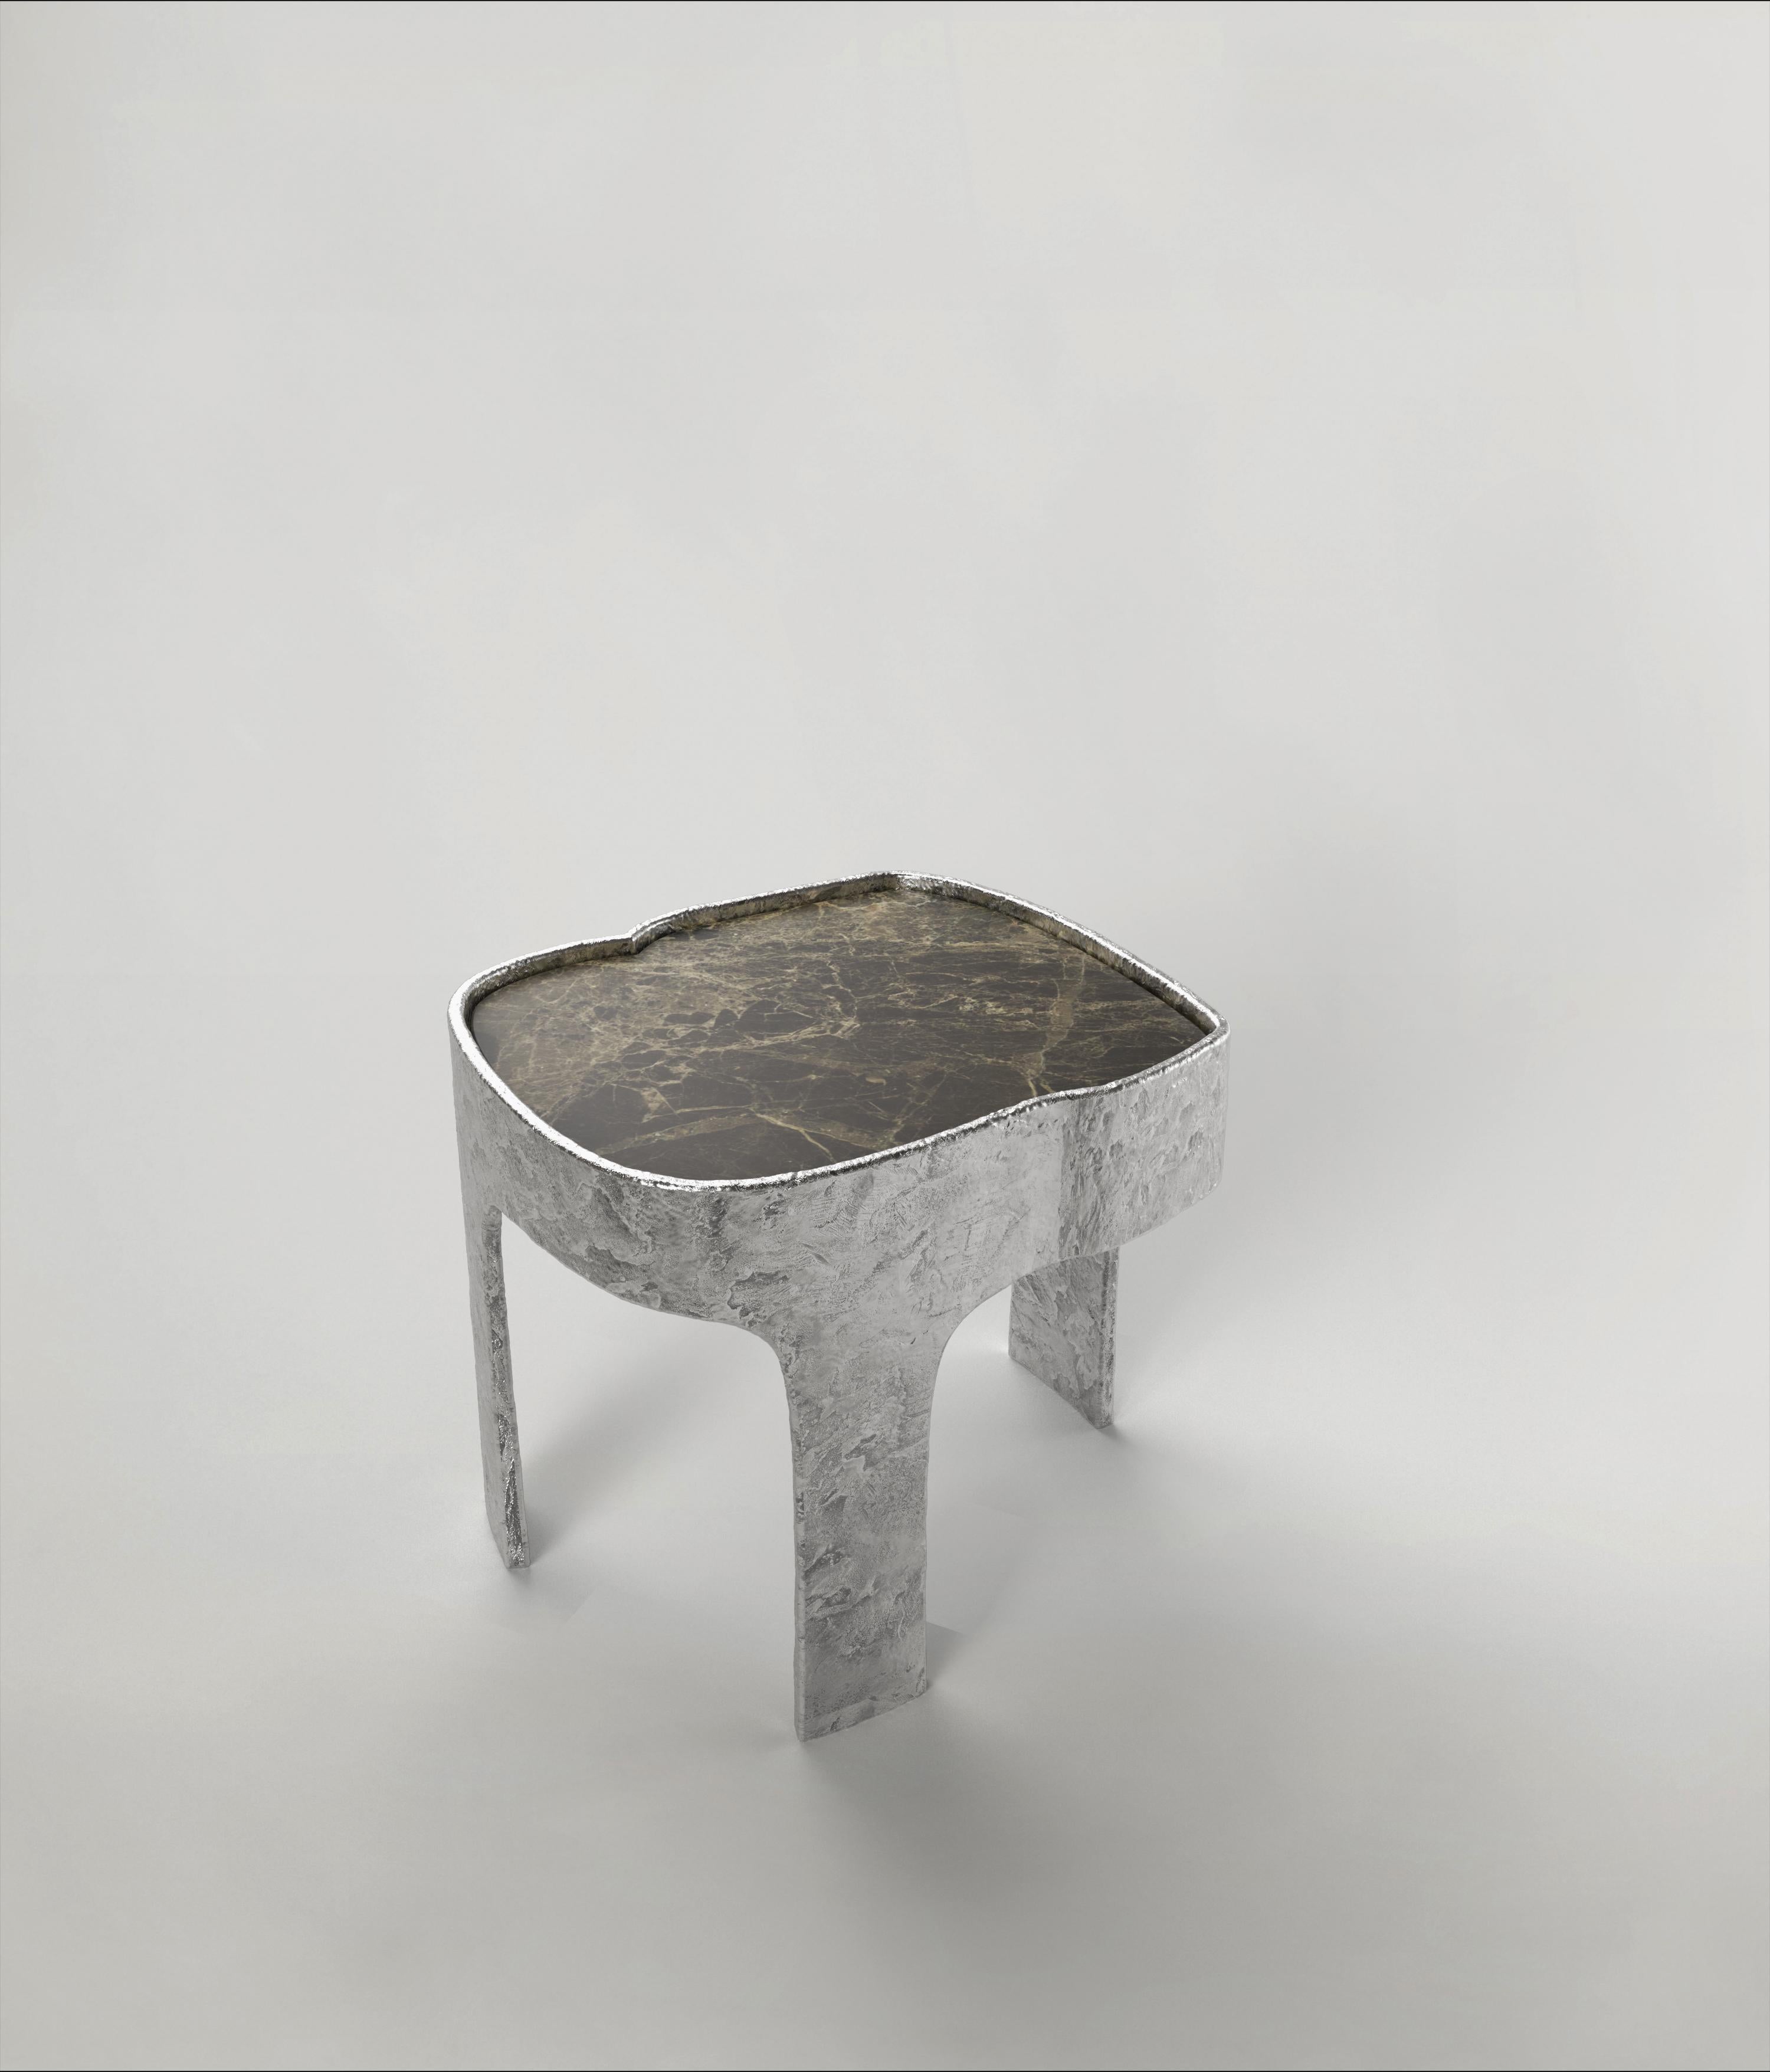 Sumatra V1 Side Table by Edizione Limitata
Limited Edition of 15 + 3 pieces. Signed and numbered.
Dimensions: D44x W38 x H37 cm
Materials: Aluminum + Breccia Paradiso Marble

Sumatra is a 21st Century collection of tables made by Italian artisans in